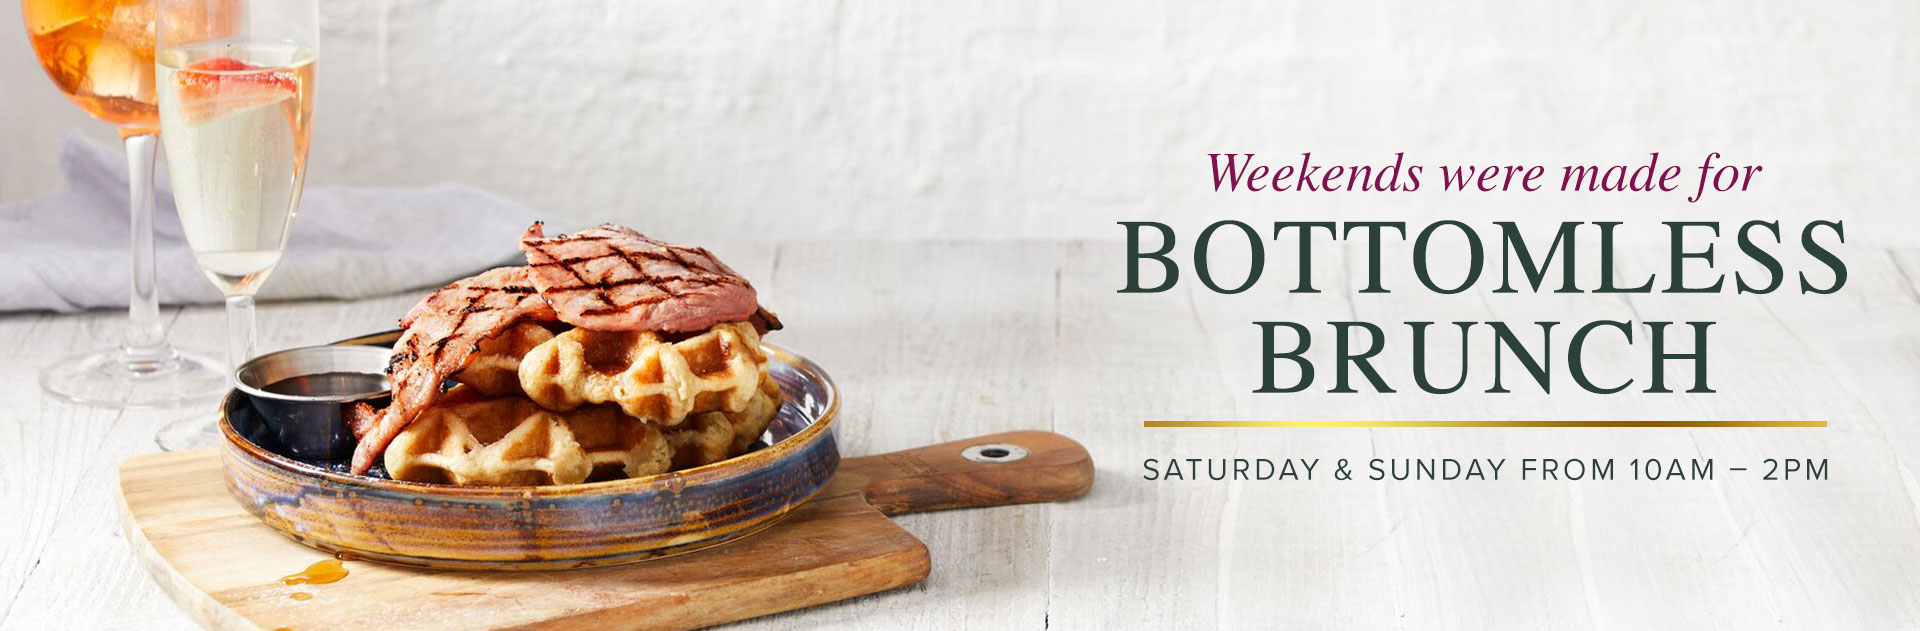 Ember Inns The Markeaton bottomless brunch of bacon, waffles and drinks